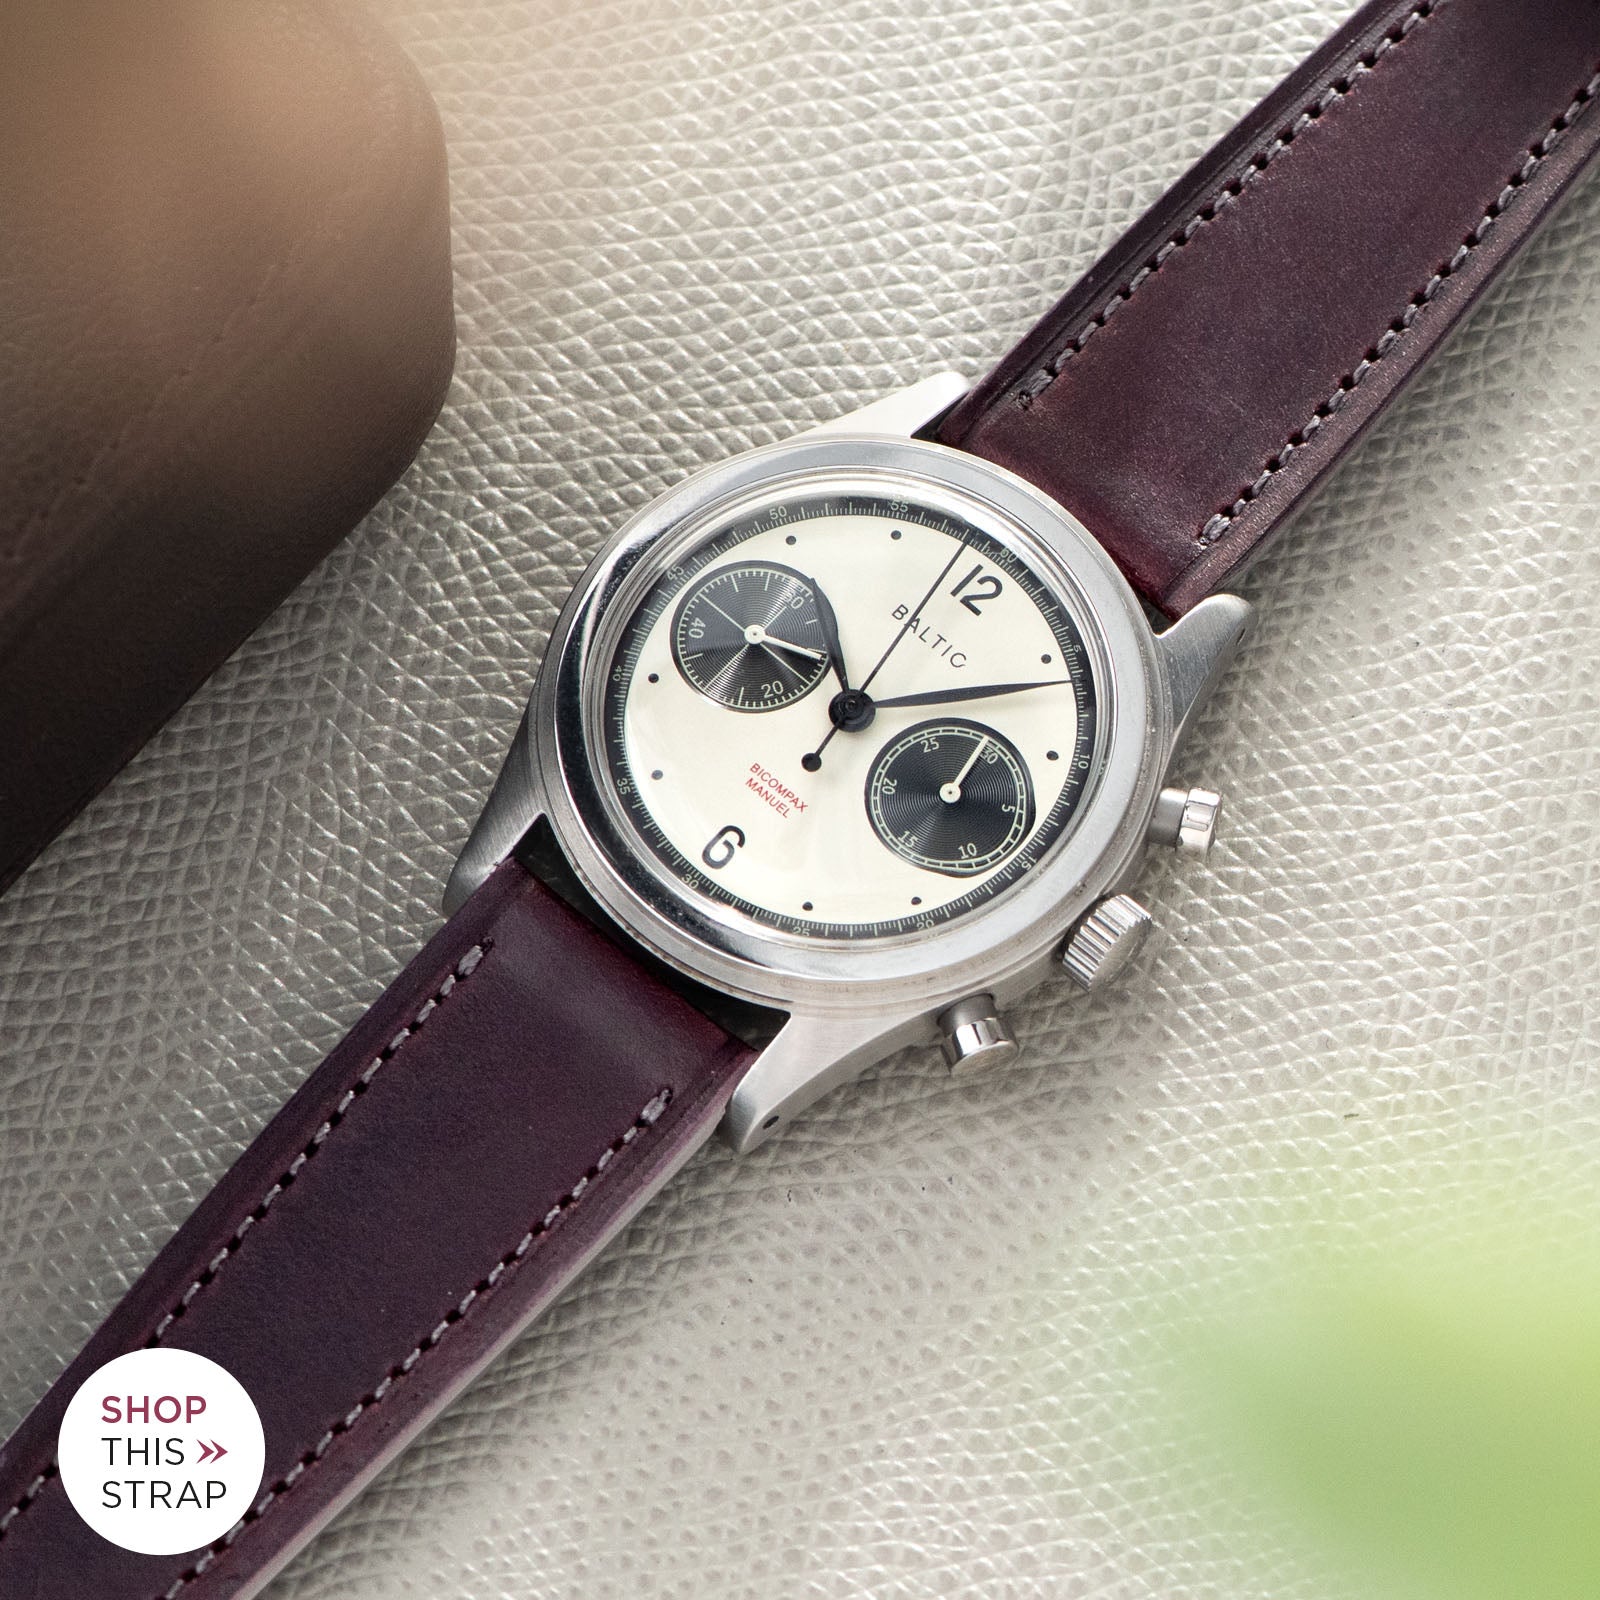 Bulang and Sons_Strap Guide_The Baltic-Chronograph-Panda-Limited-Edition_ St. Émilion Leather Watch Strap